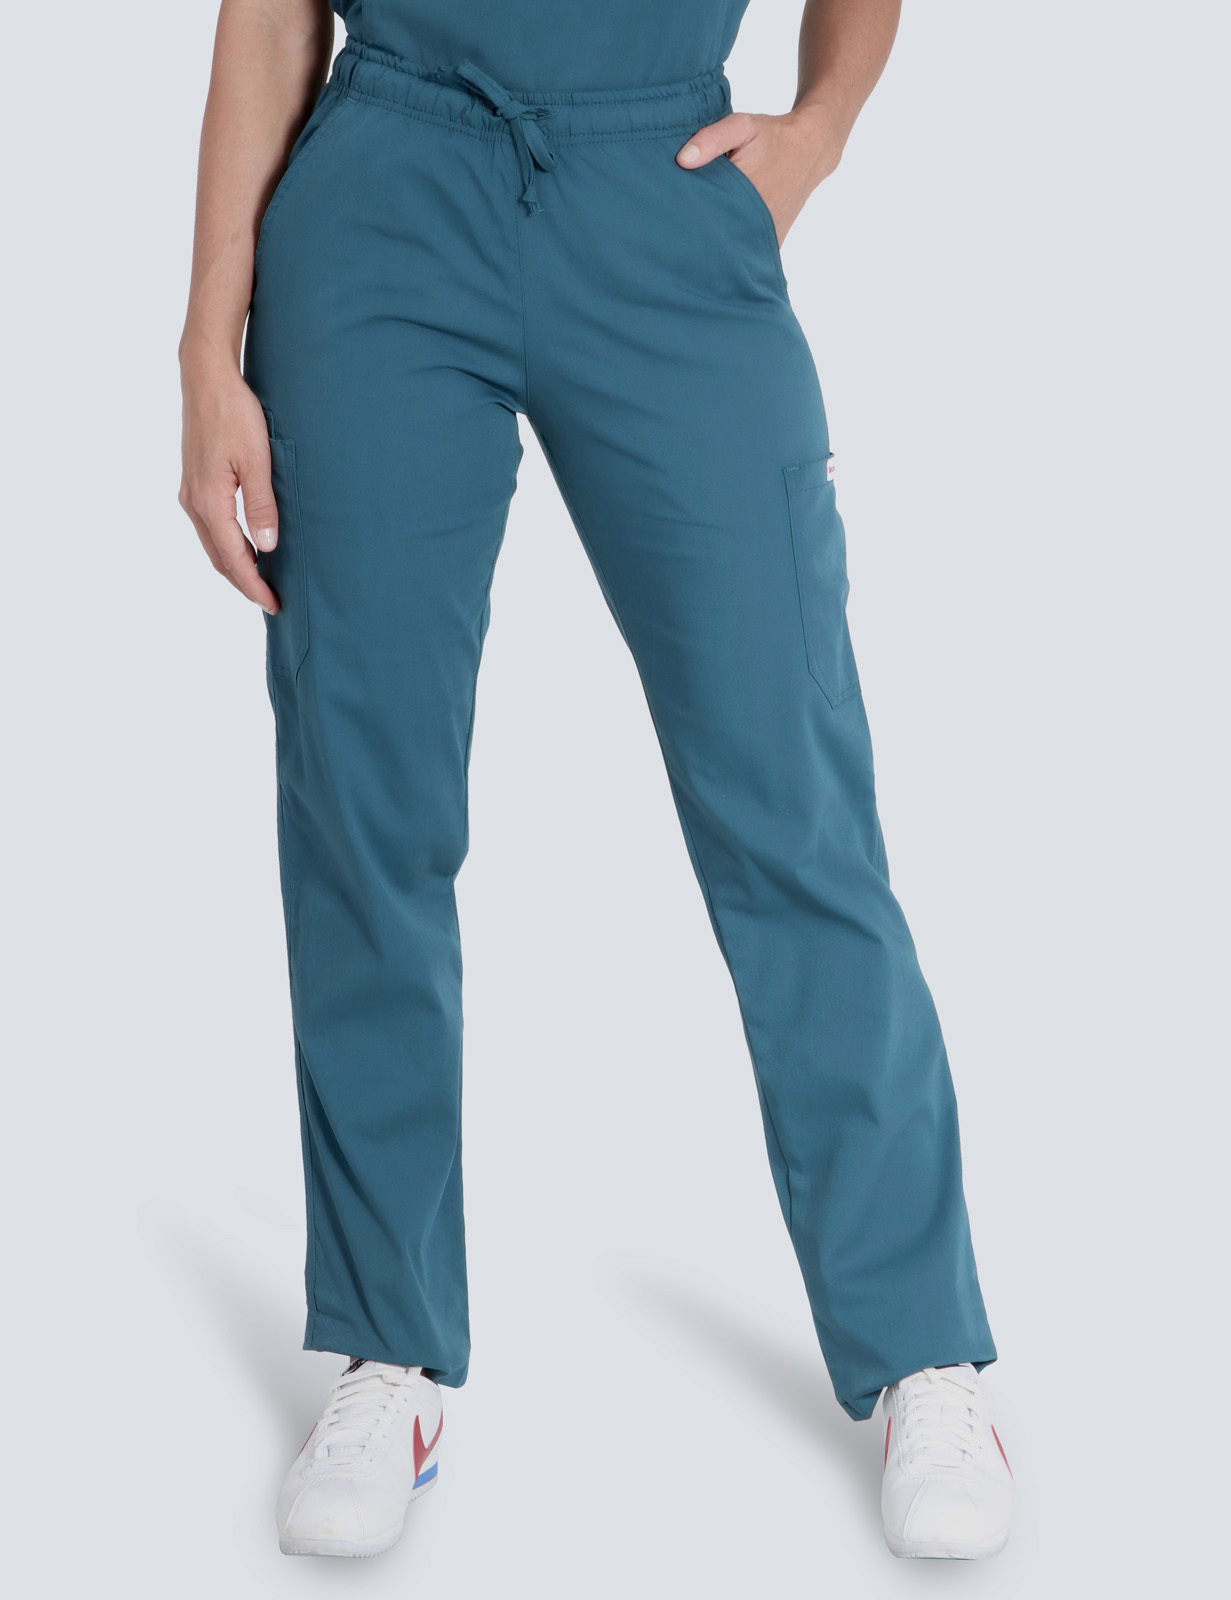 Cargo Pants - St. Vincent's Medical Imaging Radiographer (pants only) (Cargo Pants in Caribbean)